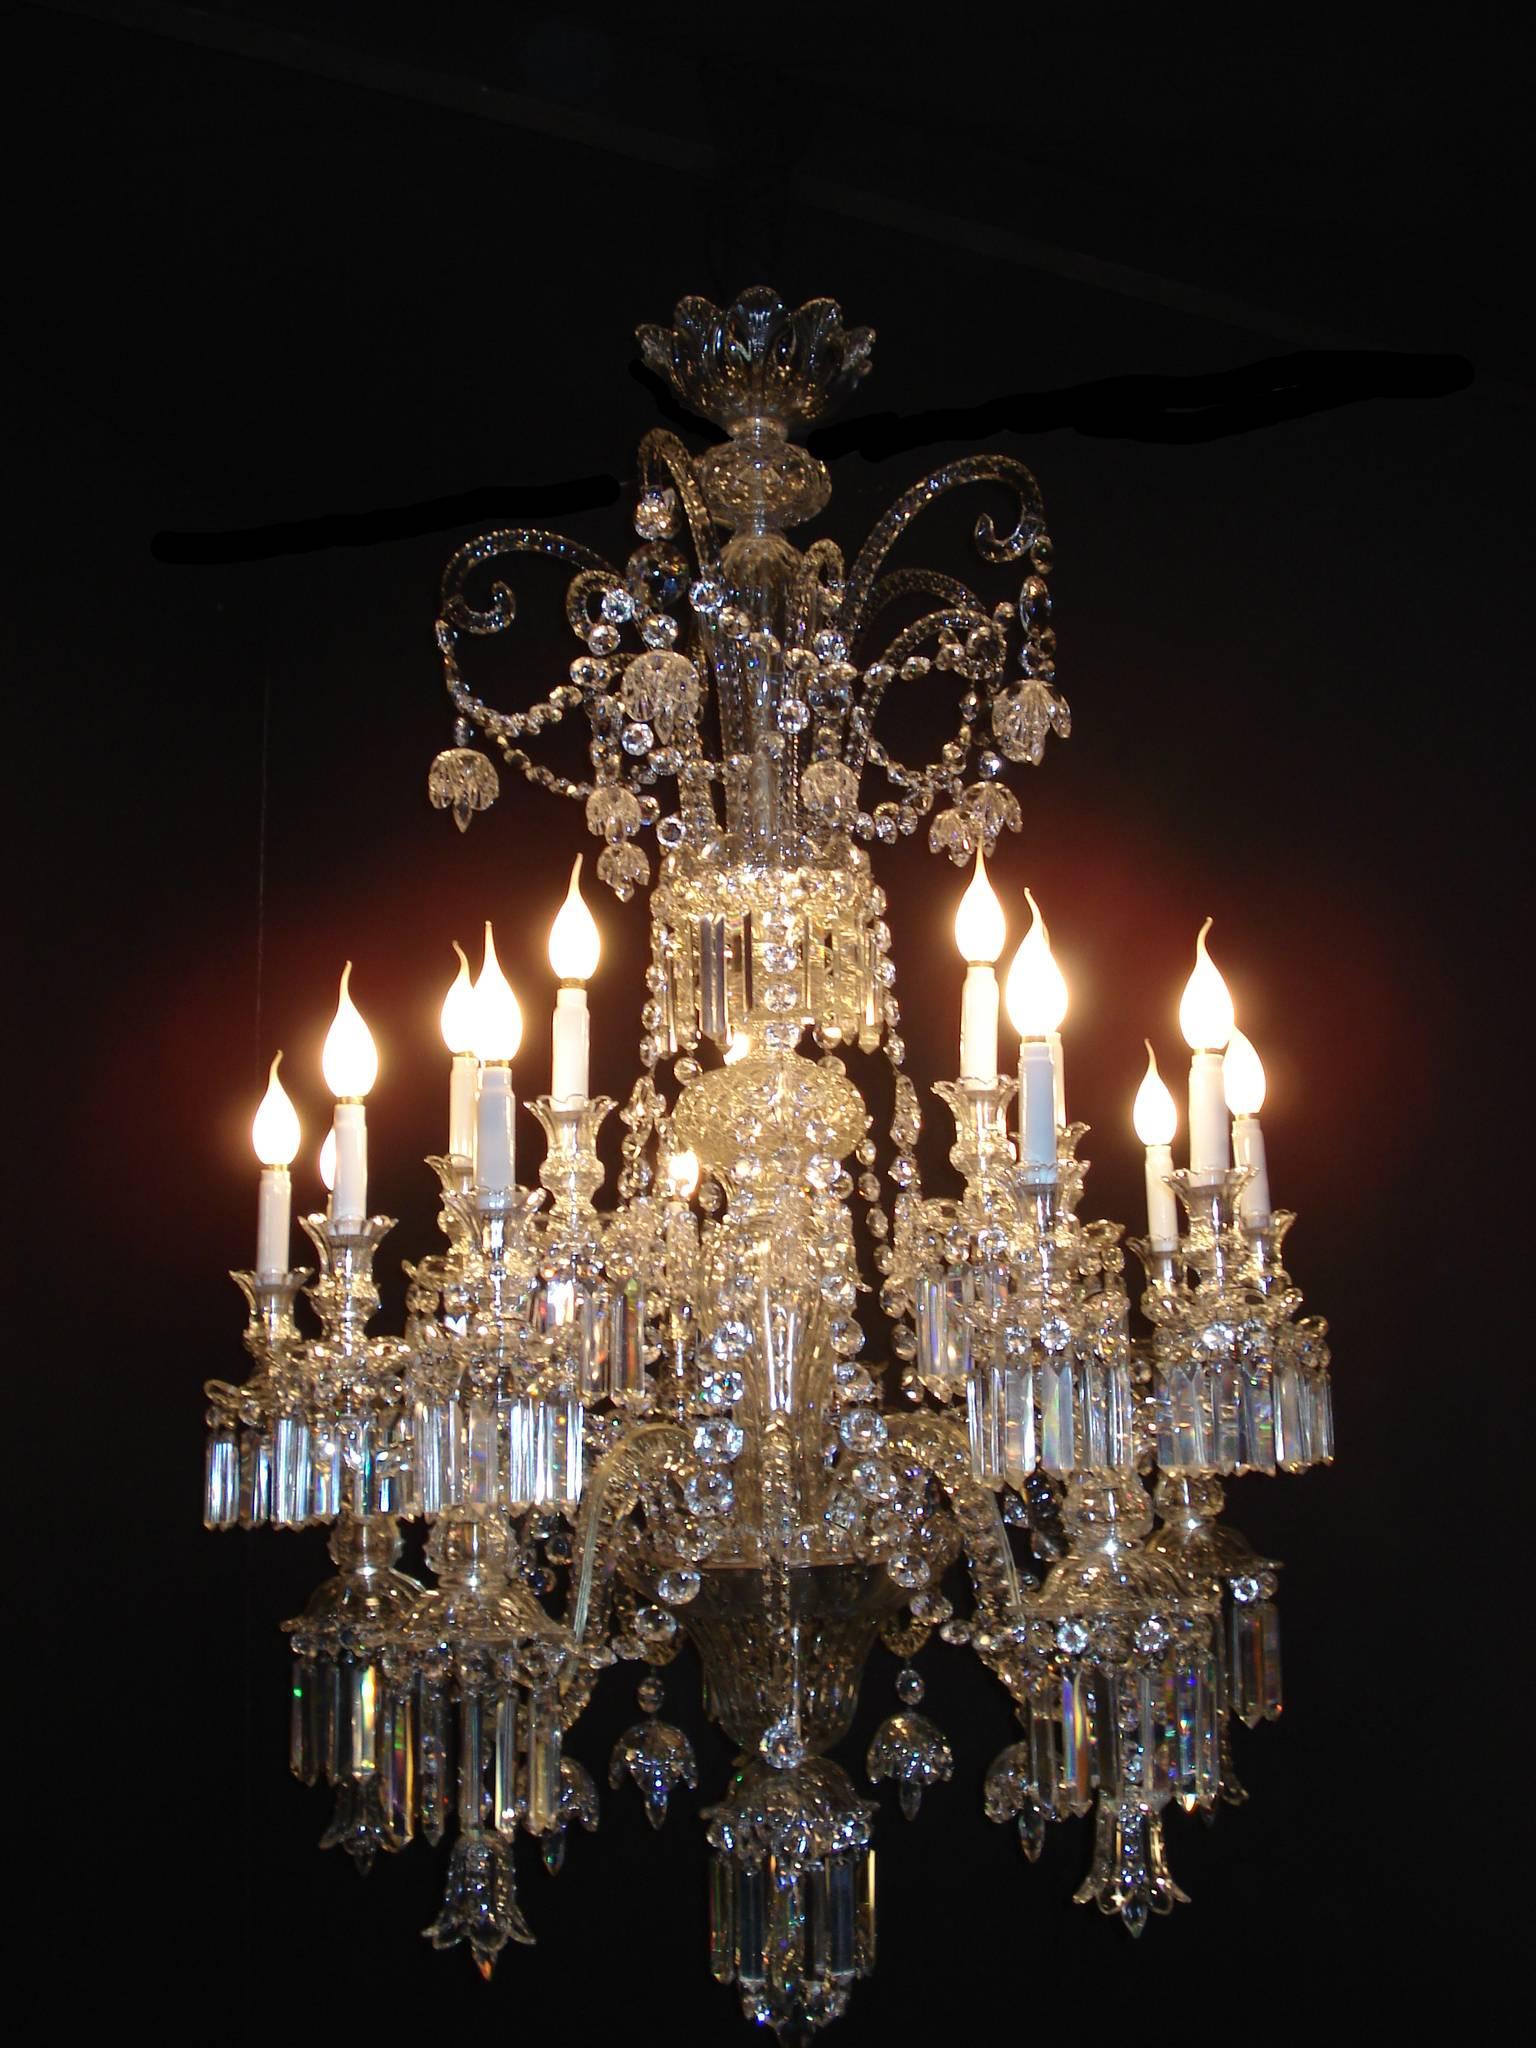 Outstanding and rare original Baccarat chandelier. The supporting structure is made of silver plated brass. The central rod is solid iron. The chandelier states no signing because at that time (1825) the Baccarat did not sign their productions.